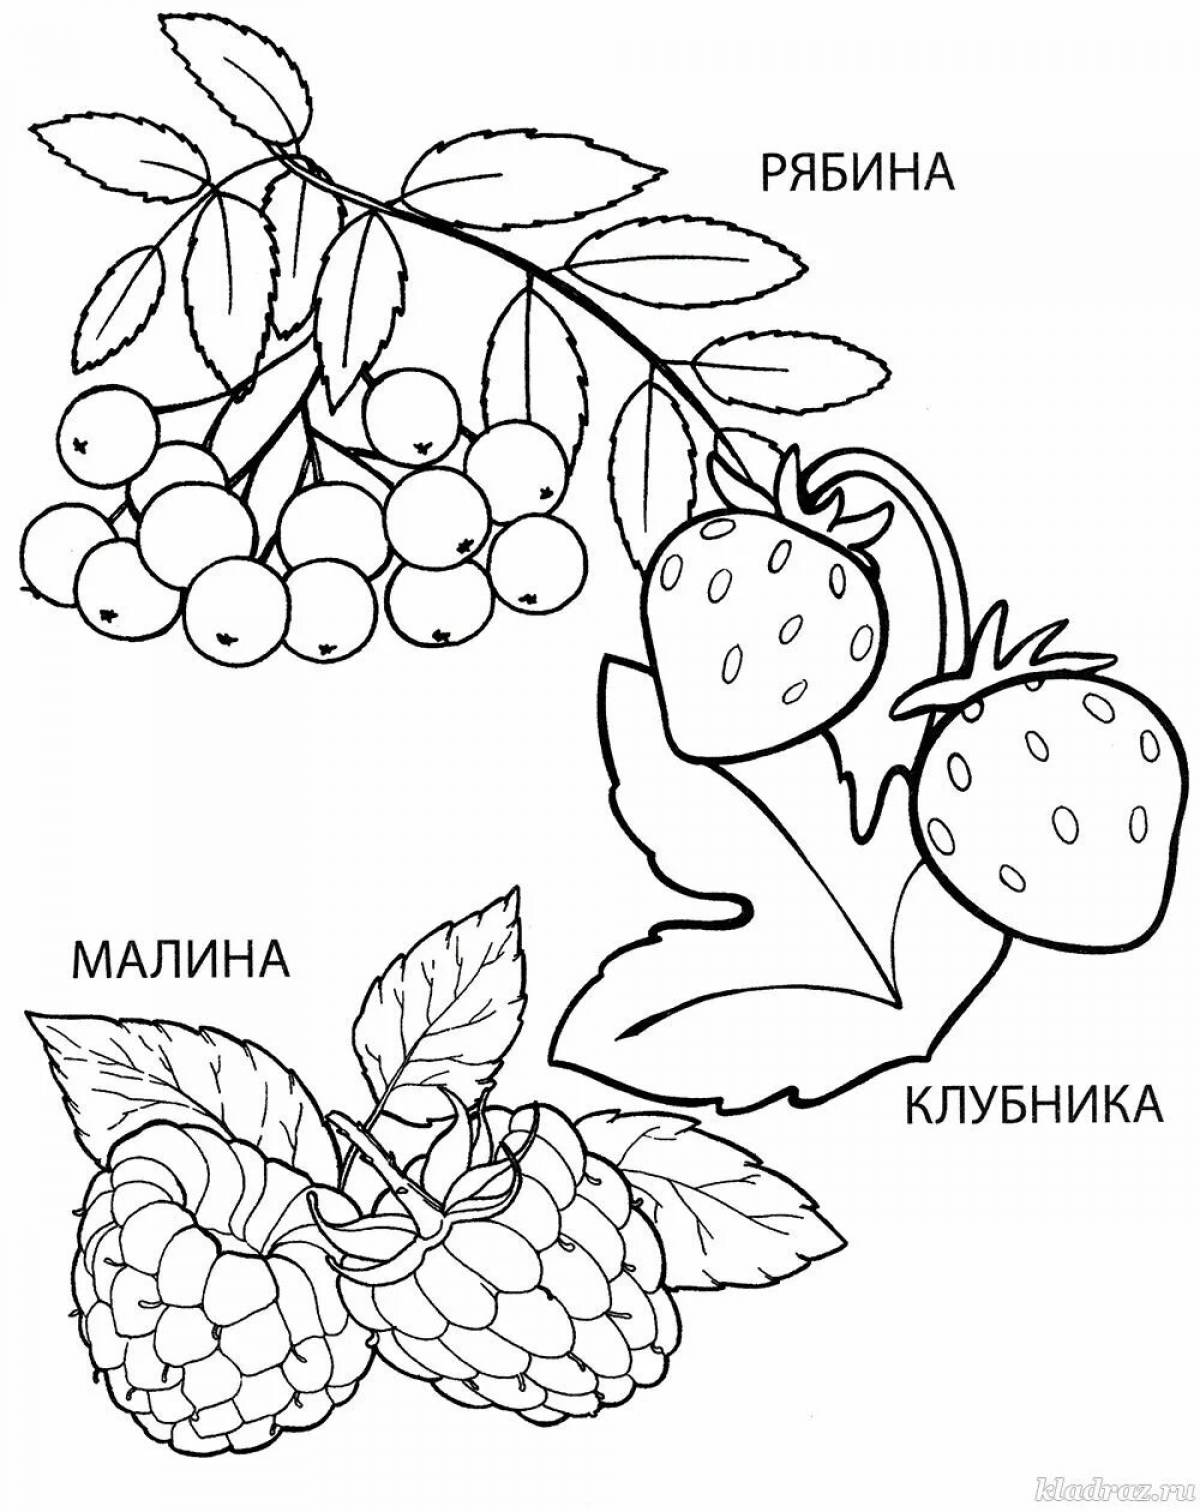 Coloring for bright berries for children 3-4 years old